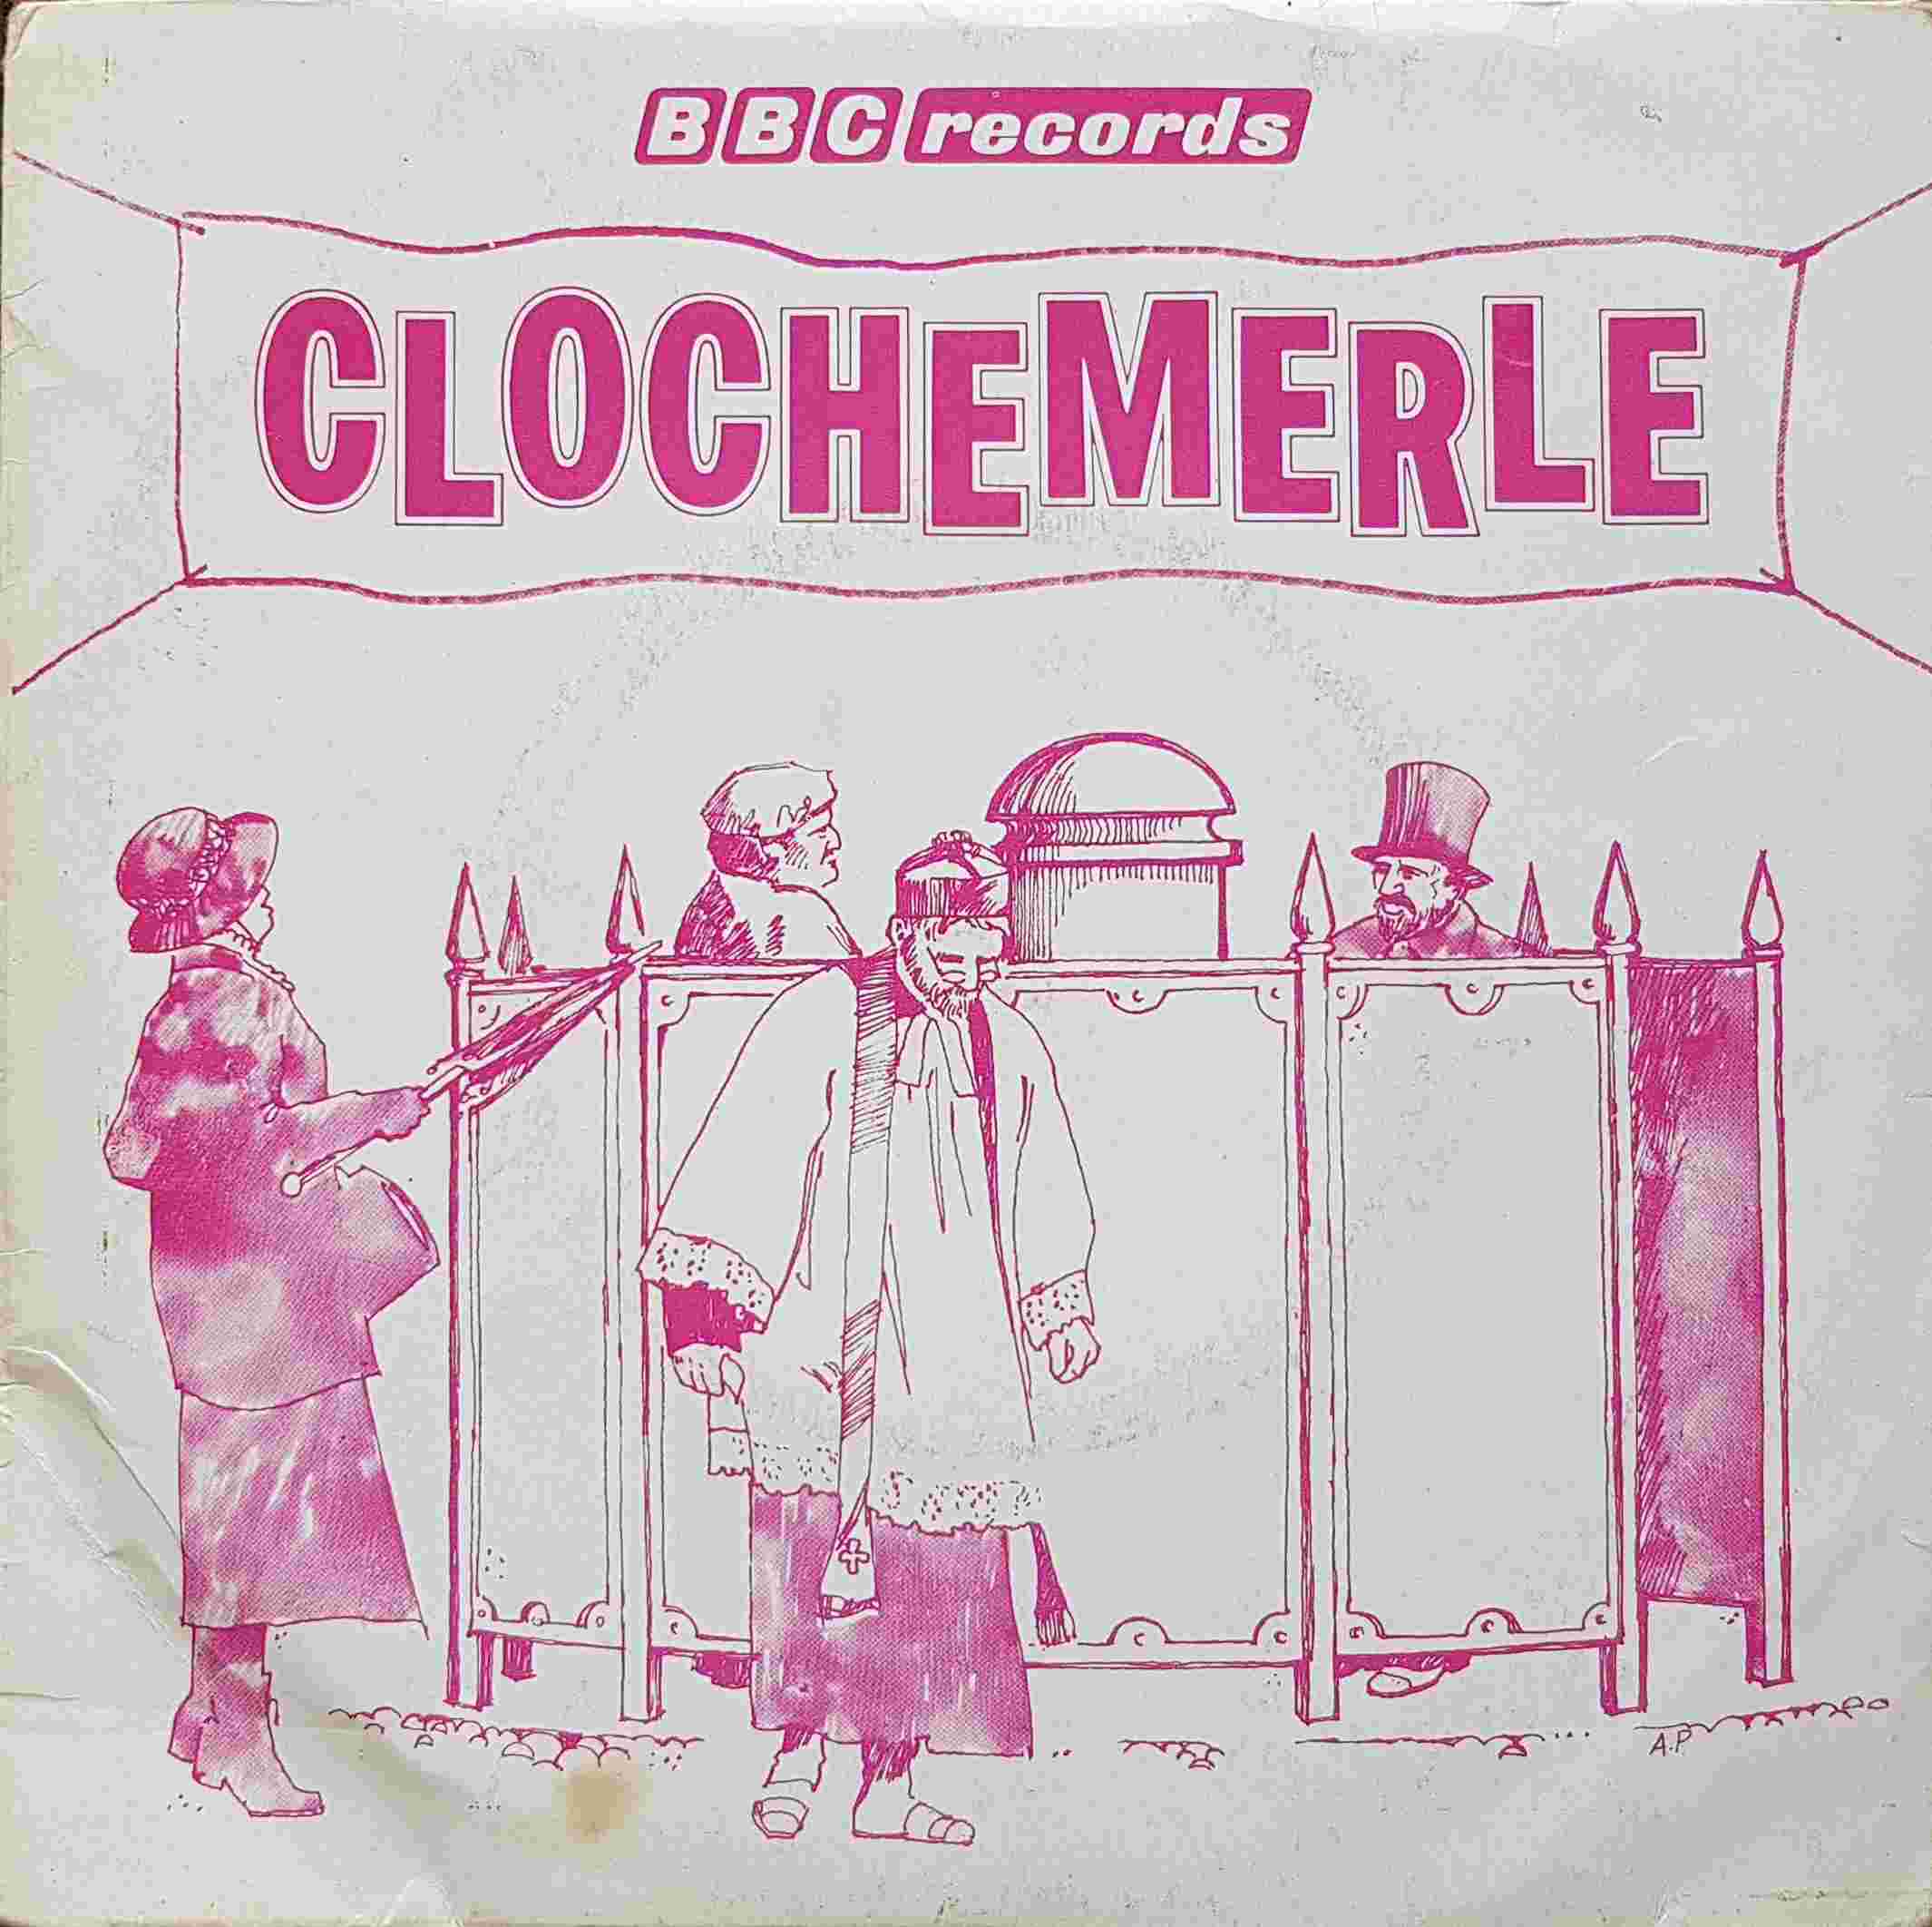 Picture of RESL 8 Clochemerle by artist Alan Roper from the BBC singles - Records and Tapes library